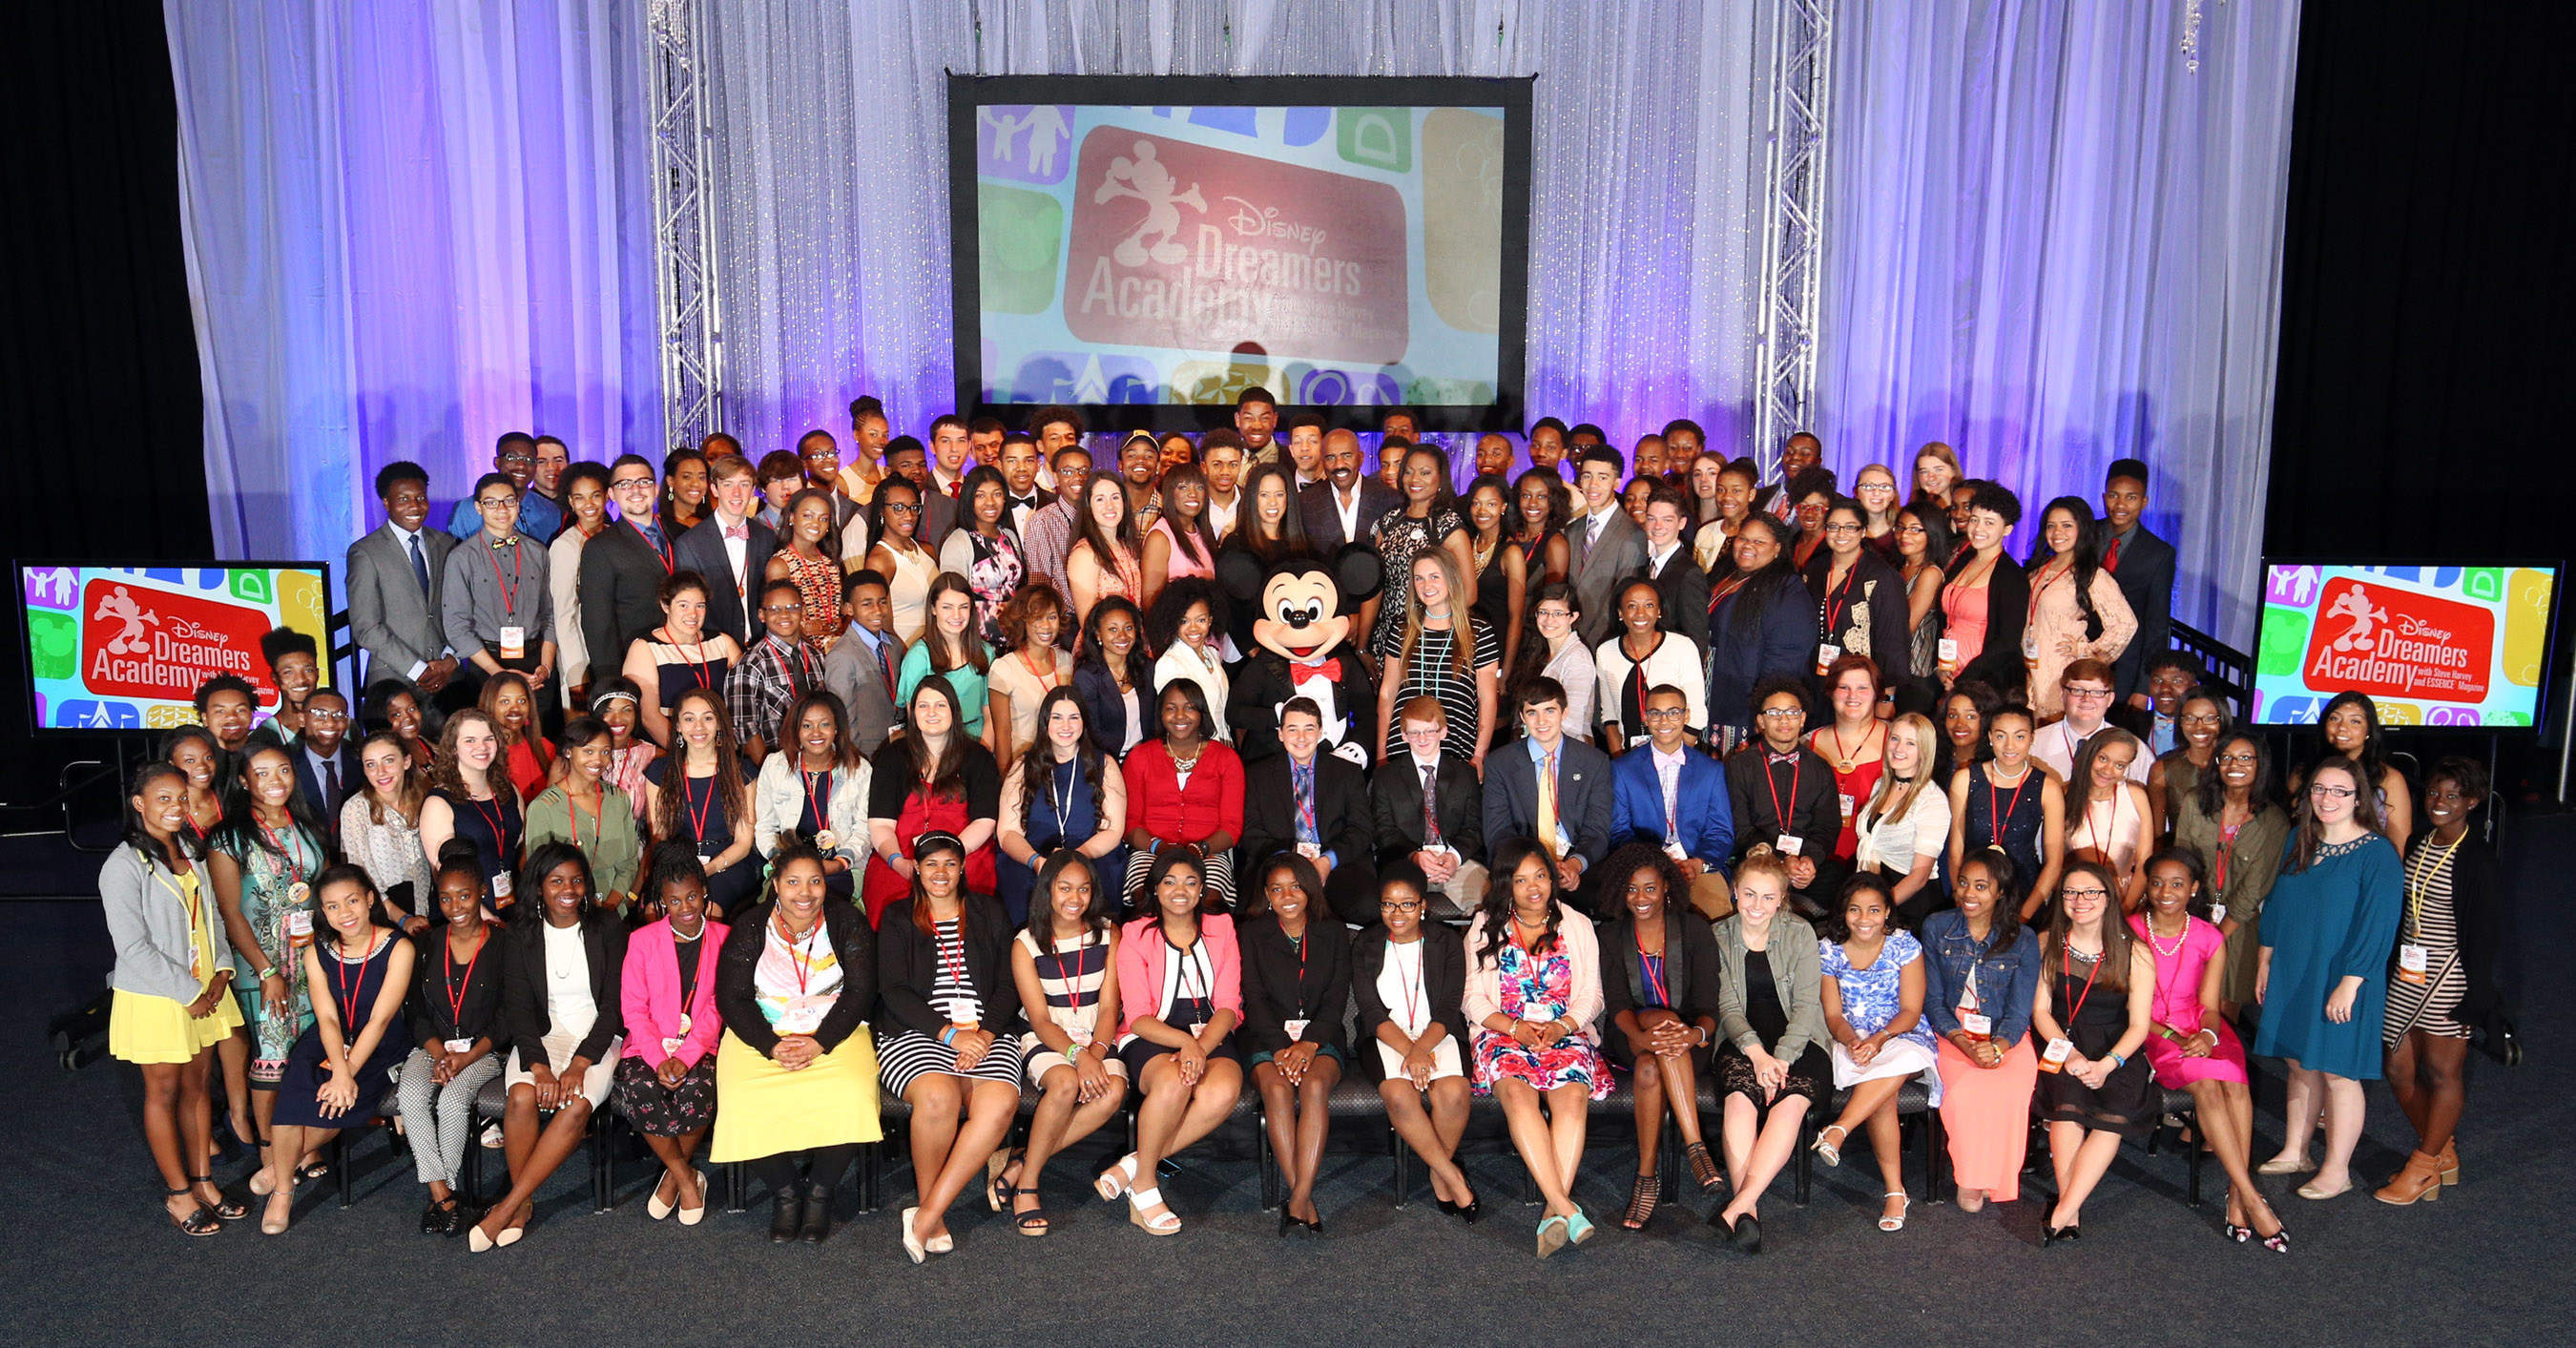 Disney Dreamers Academy Class of 2016 Disney Dreamers join (behind Mickey Mouse L-R) Mikki Taylor, editor-at-large for Essence Magazine, Michelle Ebanks, president of Essence Communications, Inc., radio and TV personality Steve Harvey, Tracey D. Powell, executive champion of Disney Dreamers Academy, and Mickey Mouse on March 6, 2016 to celebrate the commencement of the ninth Disney Dreamers Academy with Steve Harvey and Essence Magazine at Walt Disney World Resort in Lake Buena Vista, Fla. The annual...